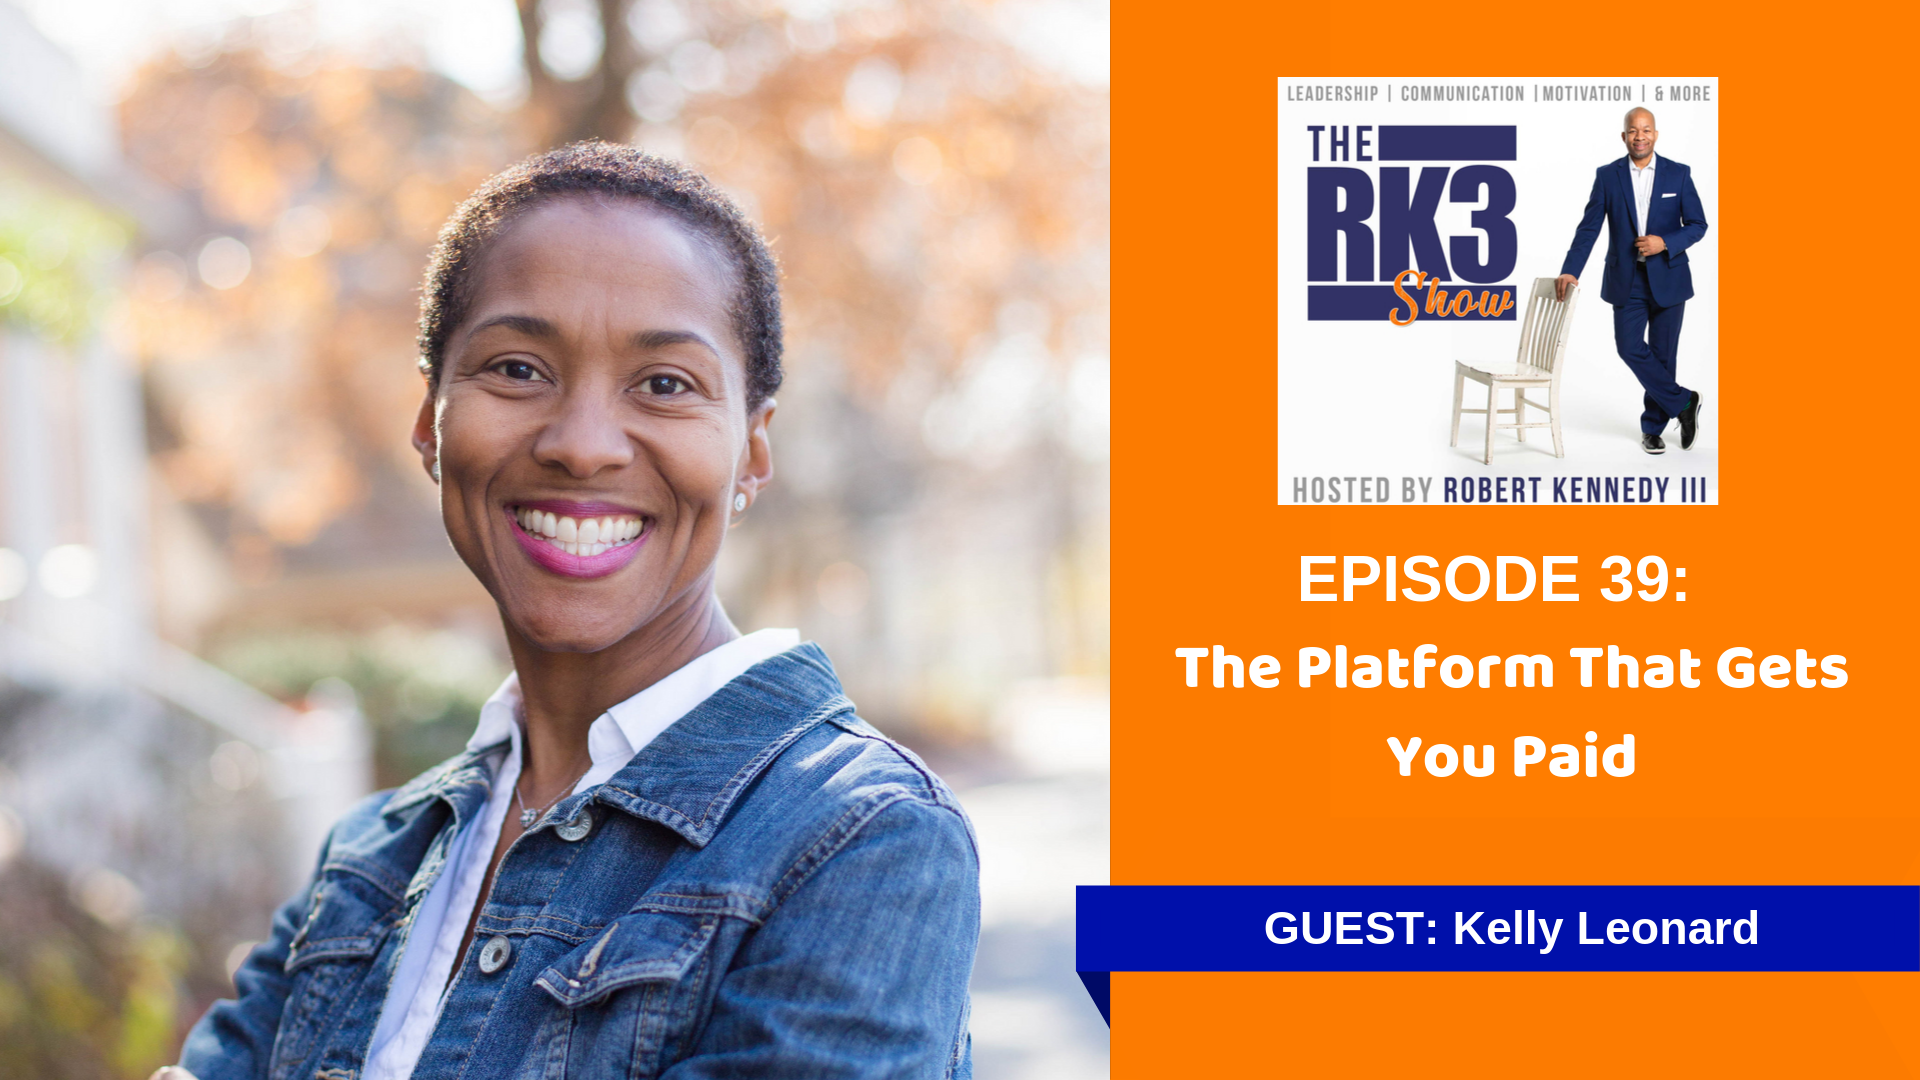 Kelly Leonard - The Platform That Gets You Paid